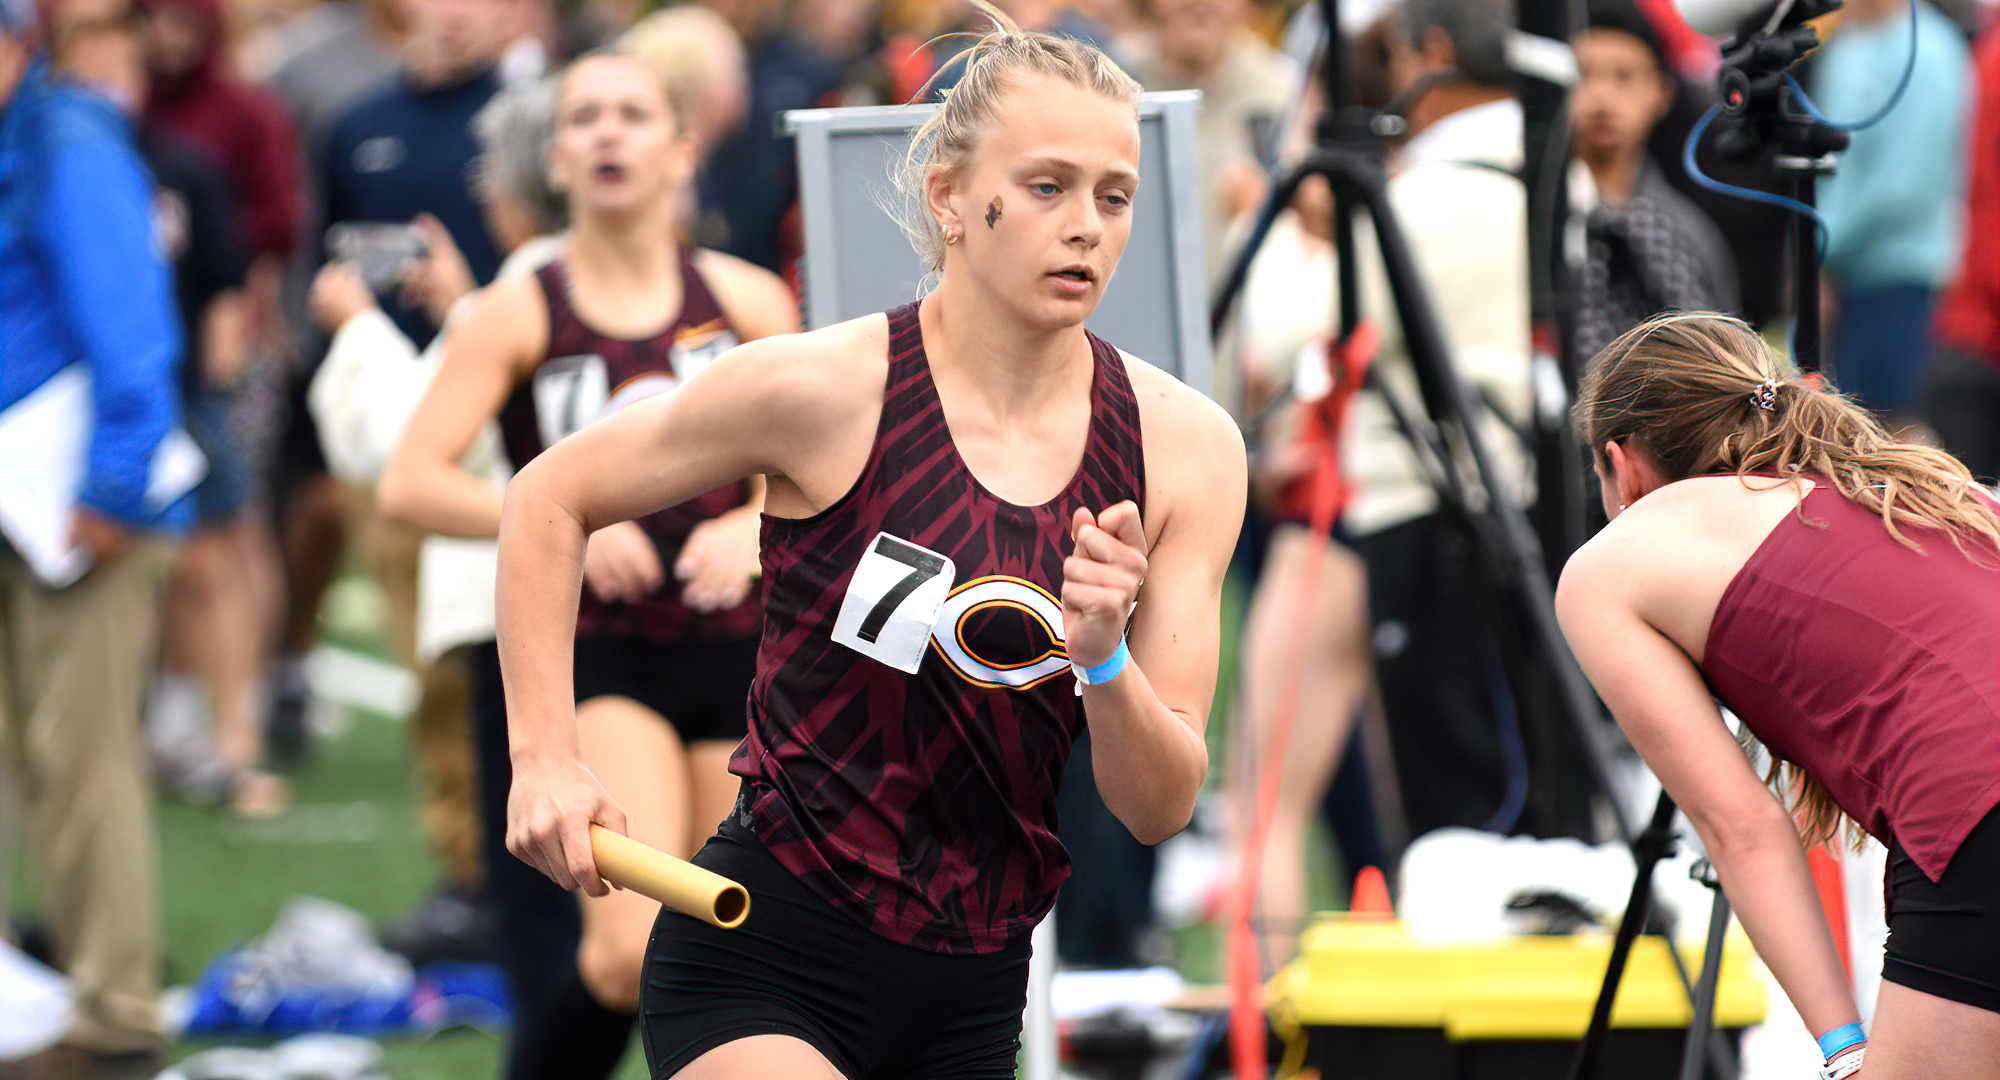 Sophomore Kyla Nygaard opened the first full outdoor meet of the year by winning the 400 meters at the Hamline Invitational.